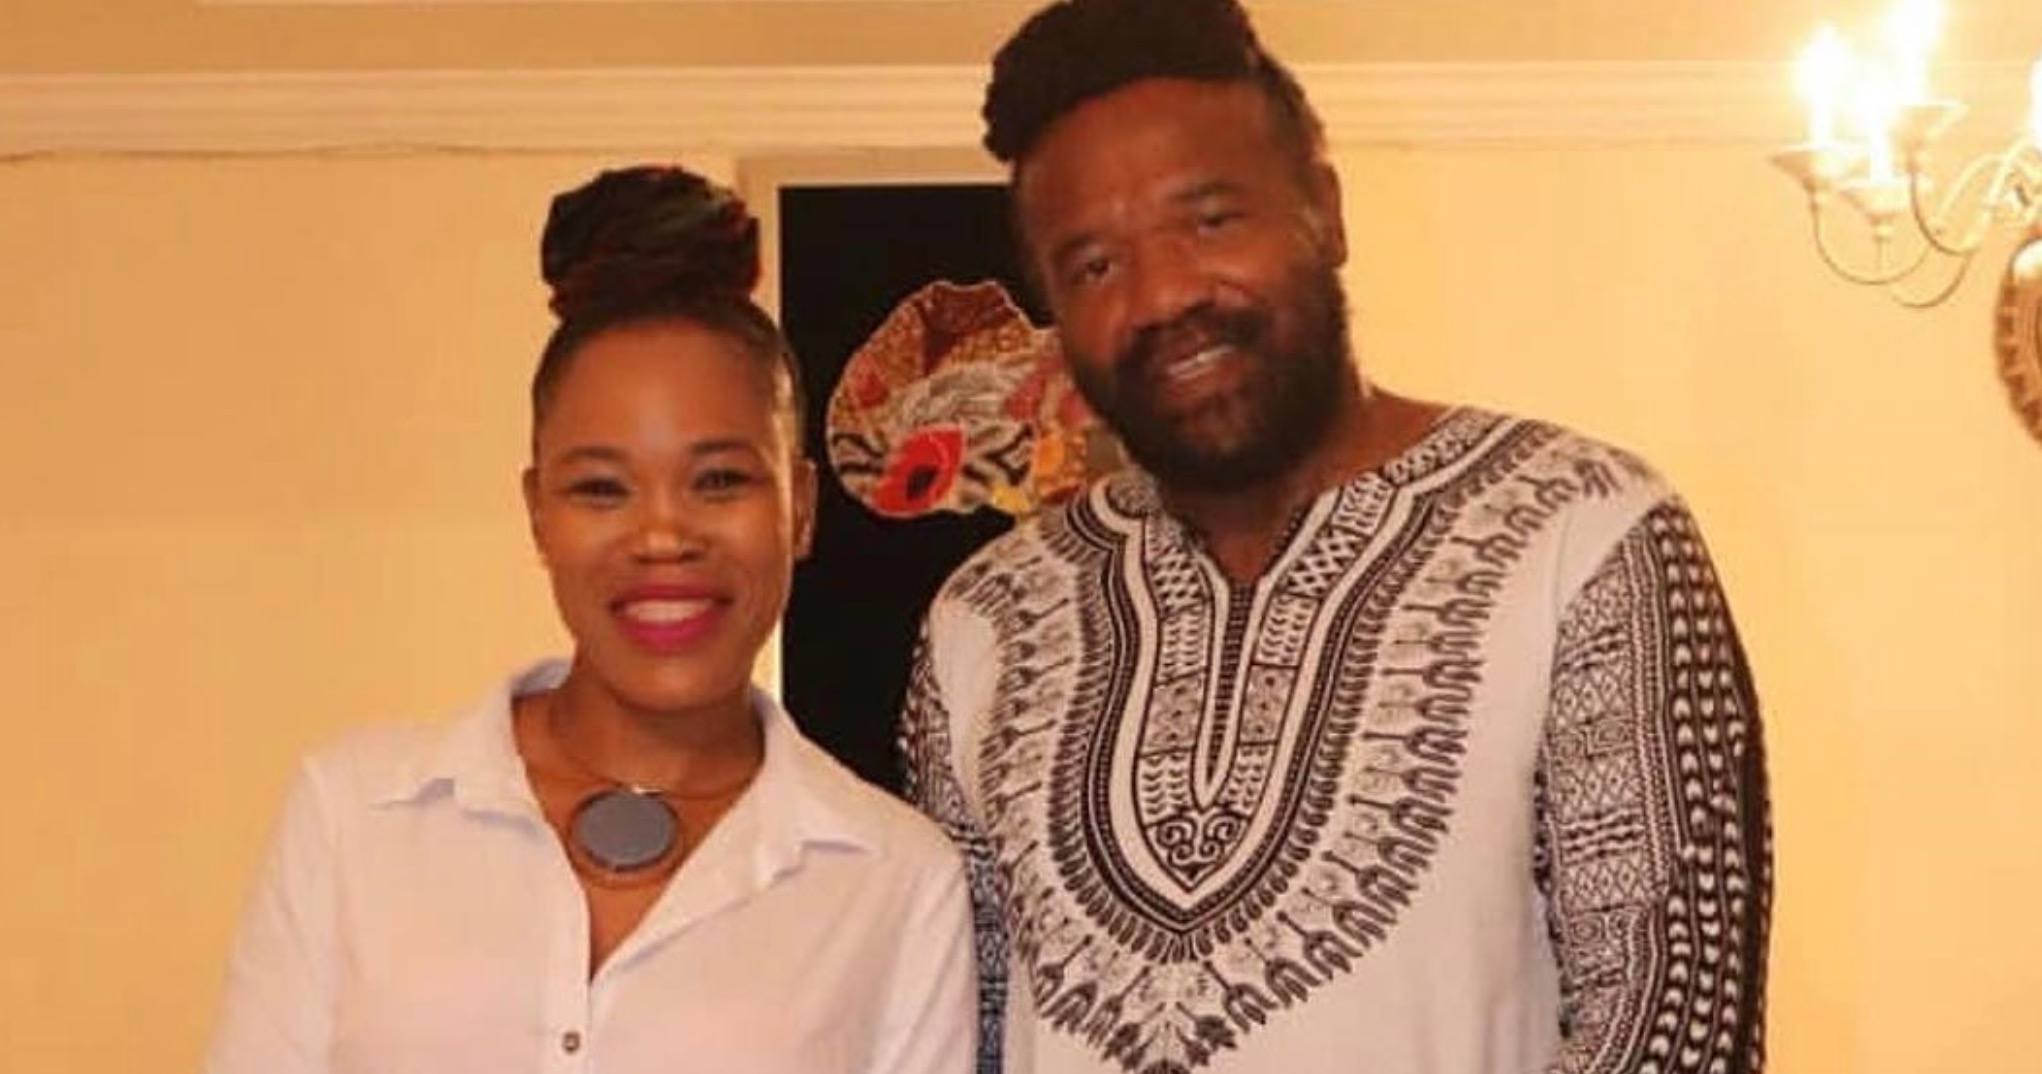 Tony Rebel and Queen Ifrica Unite to Have Daughter Tanzania Released by the Police - Watch Videos